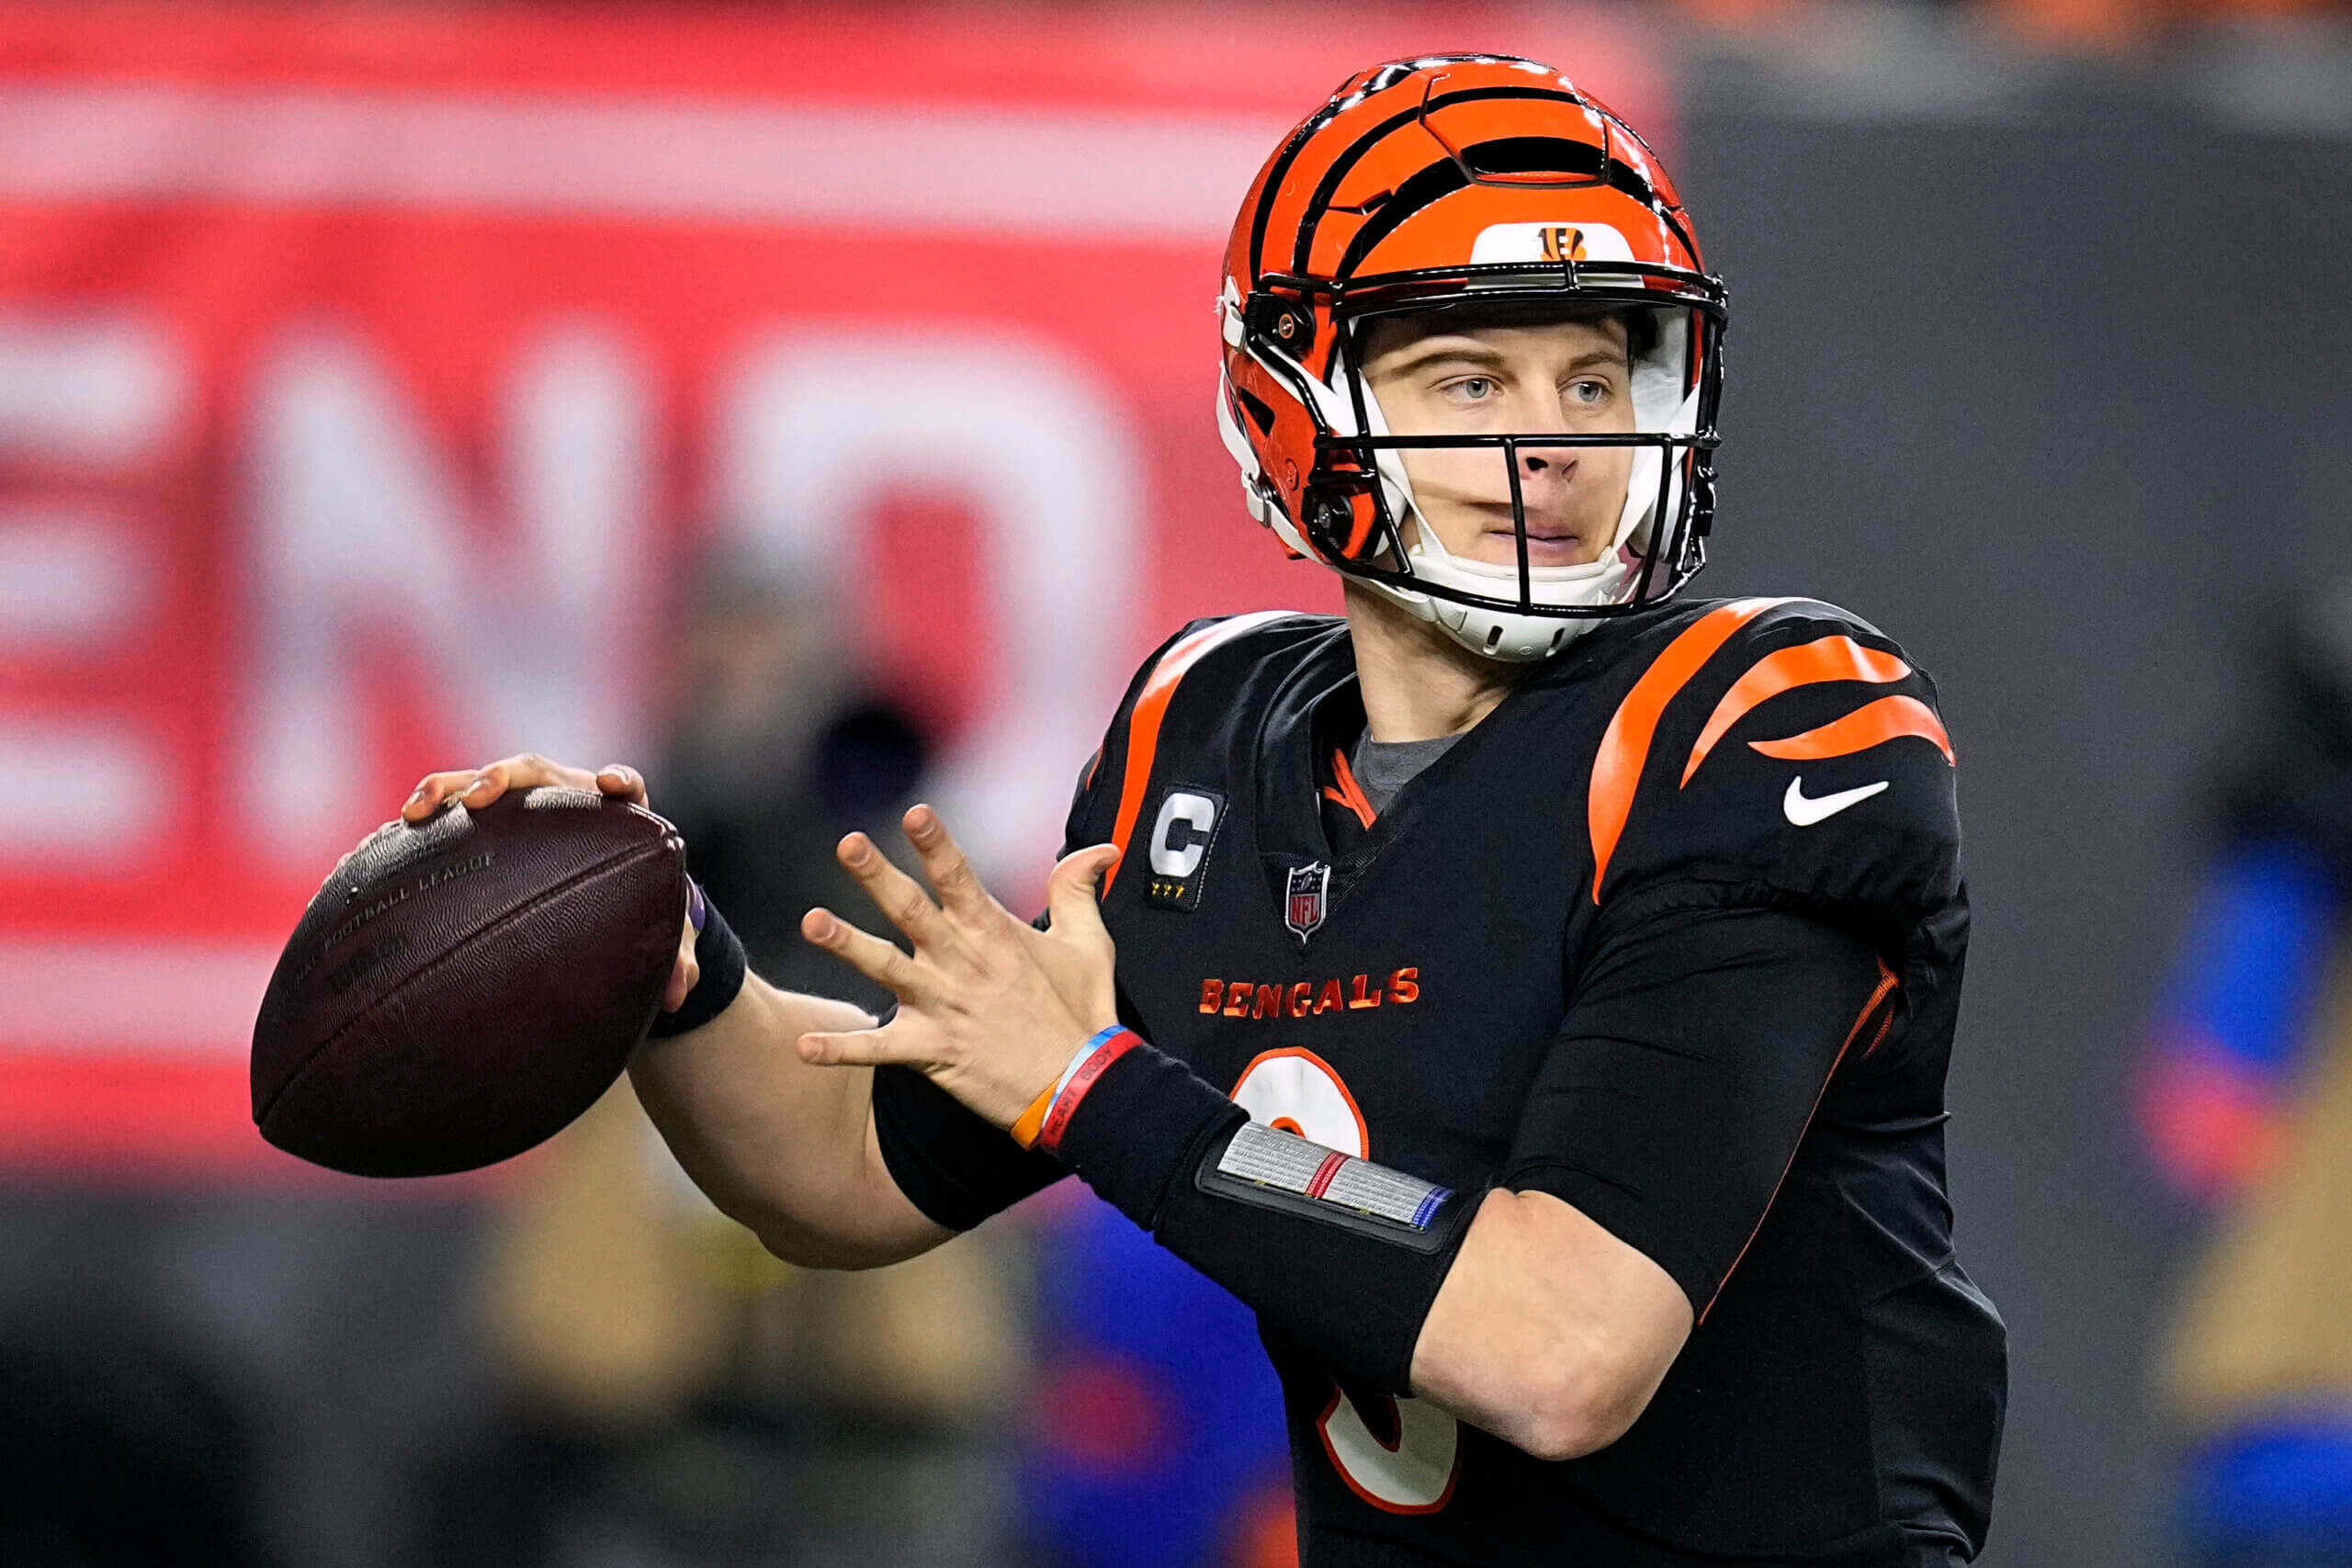 Bengals vs. Browns: Best bets, TV schedule & betting preview for NFL week 1